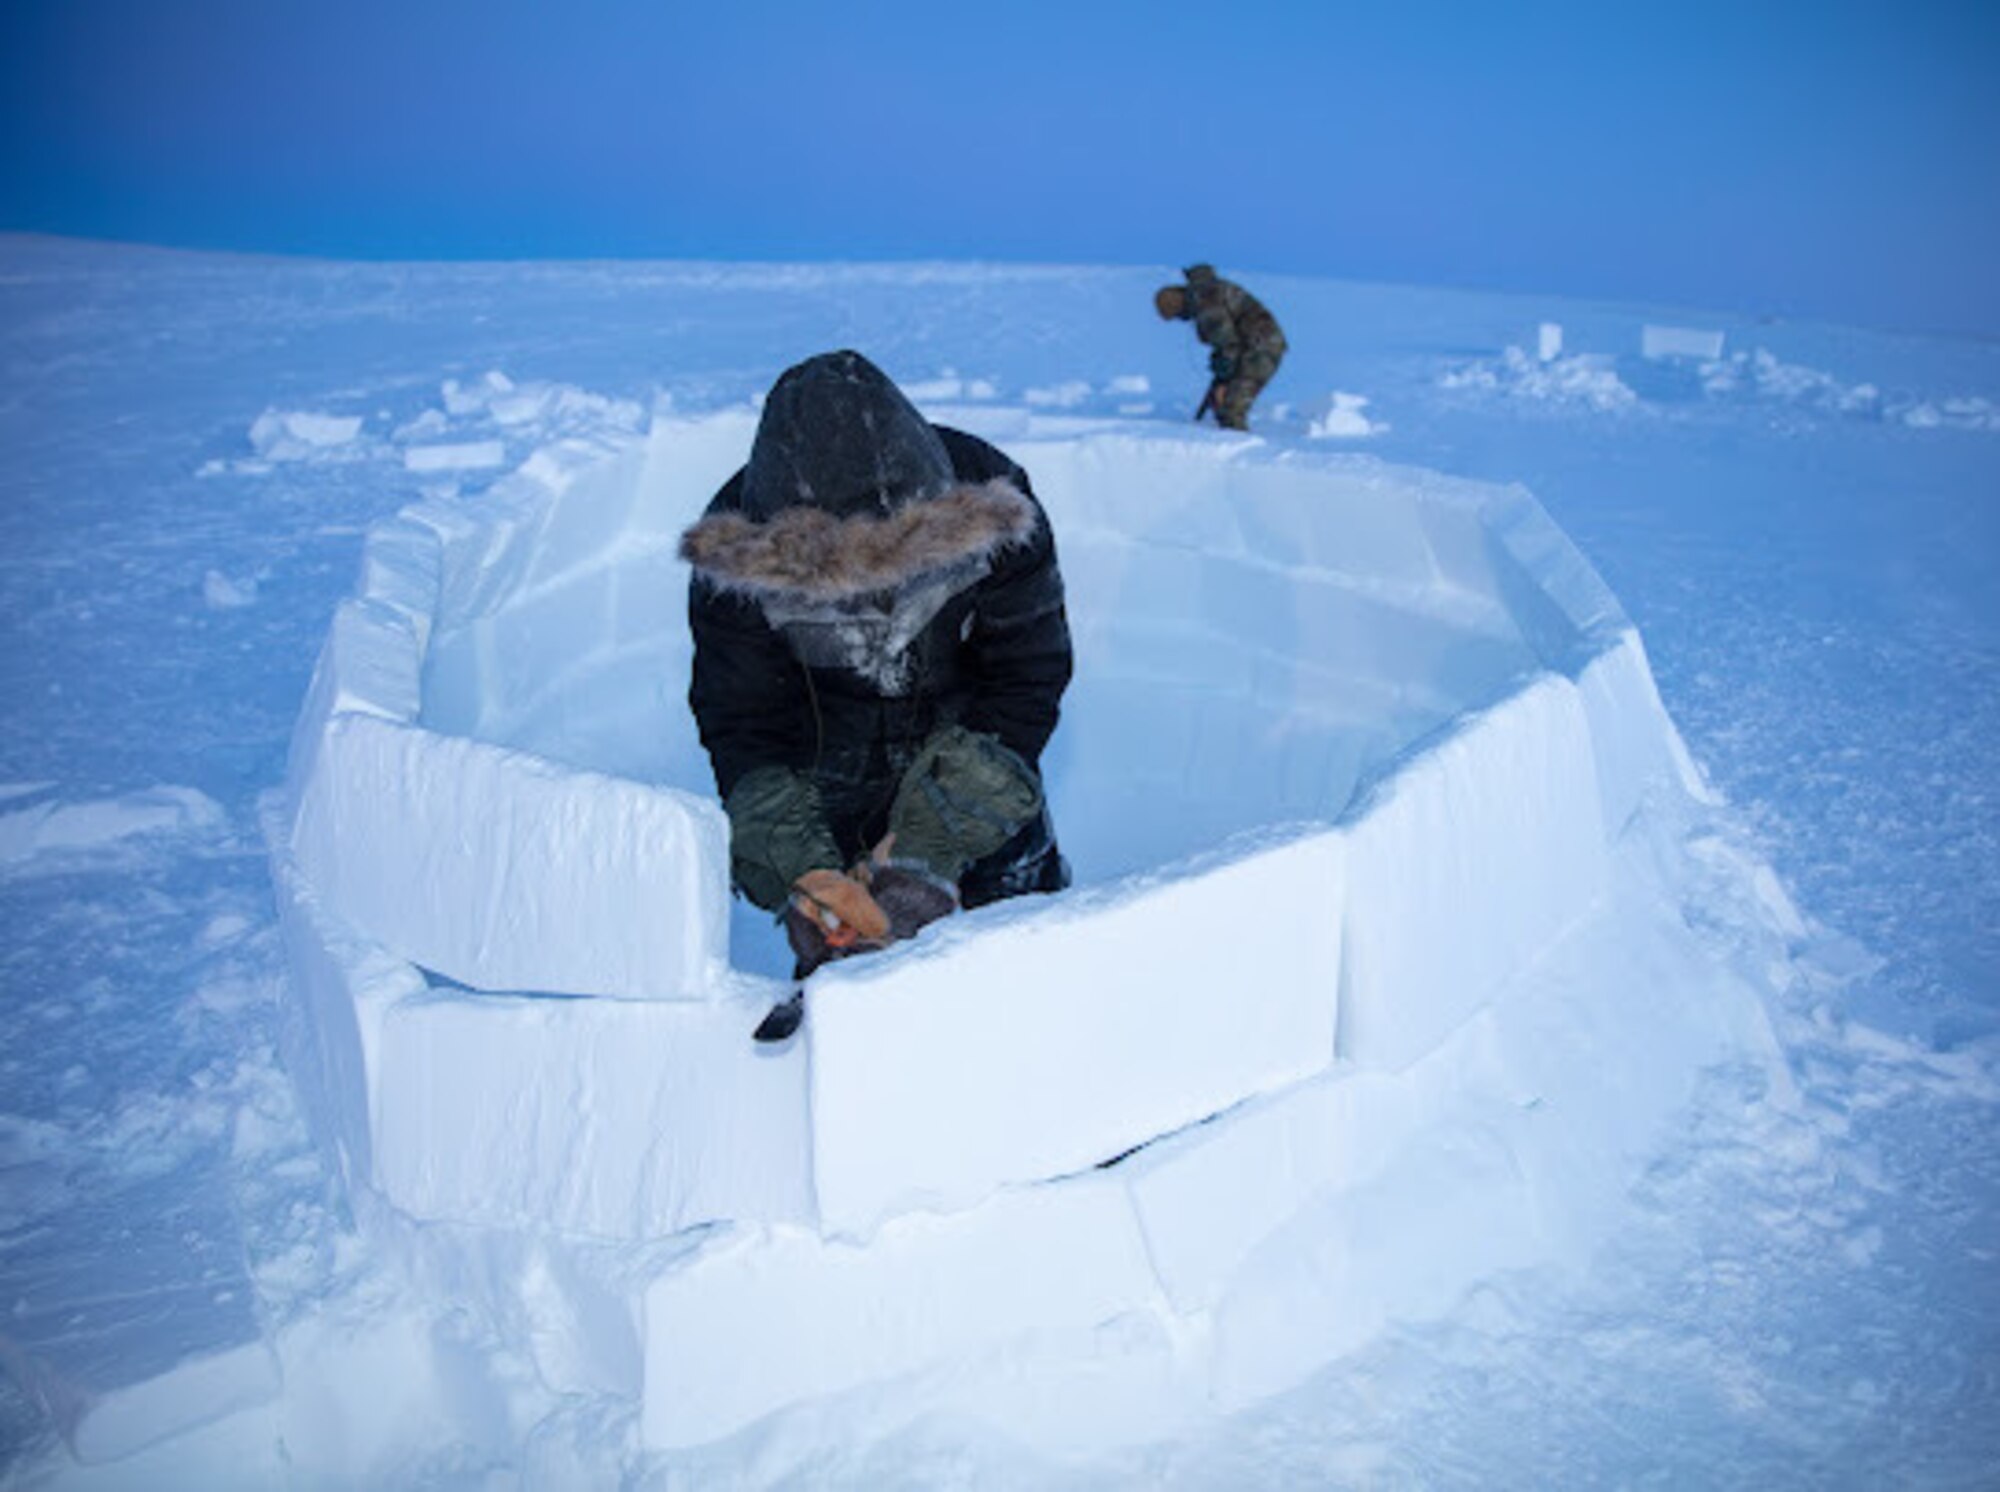 U.S. Air Force Master Sgt. Cody Hallas, 133rd Contingency Response Team, builds an Igloo in Crystal City, Canada.